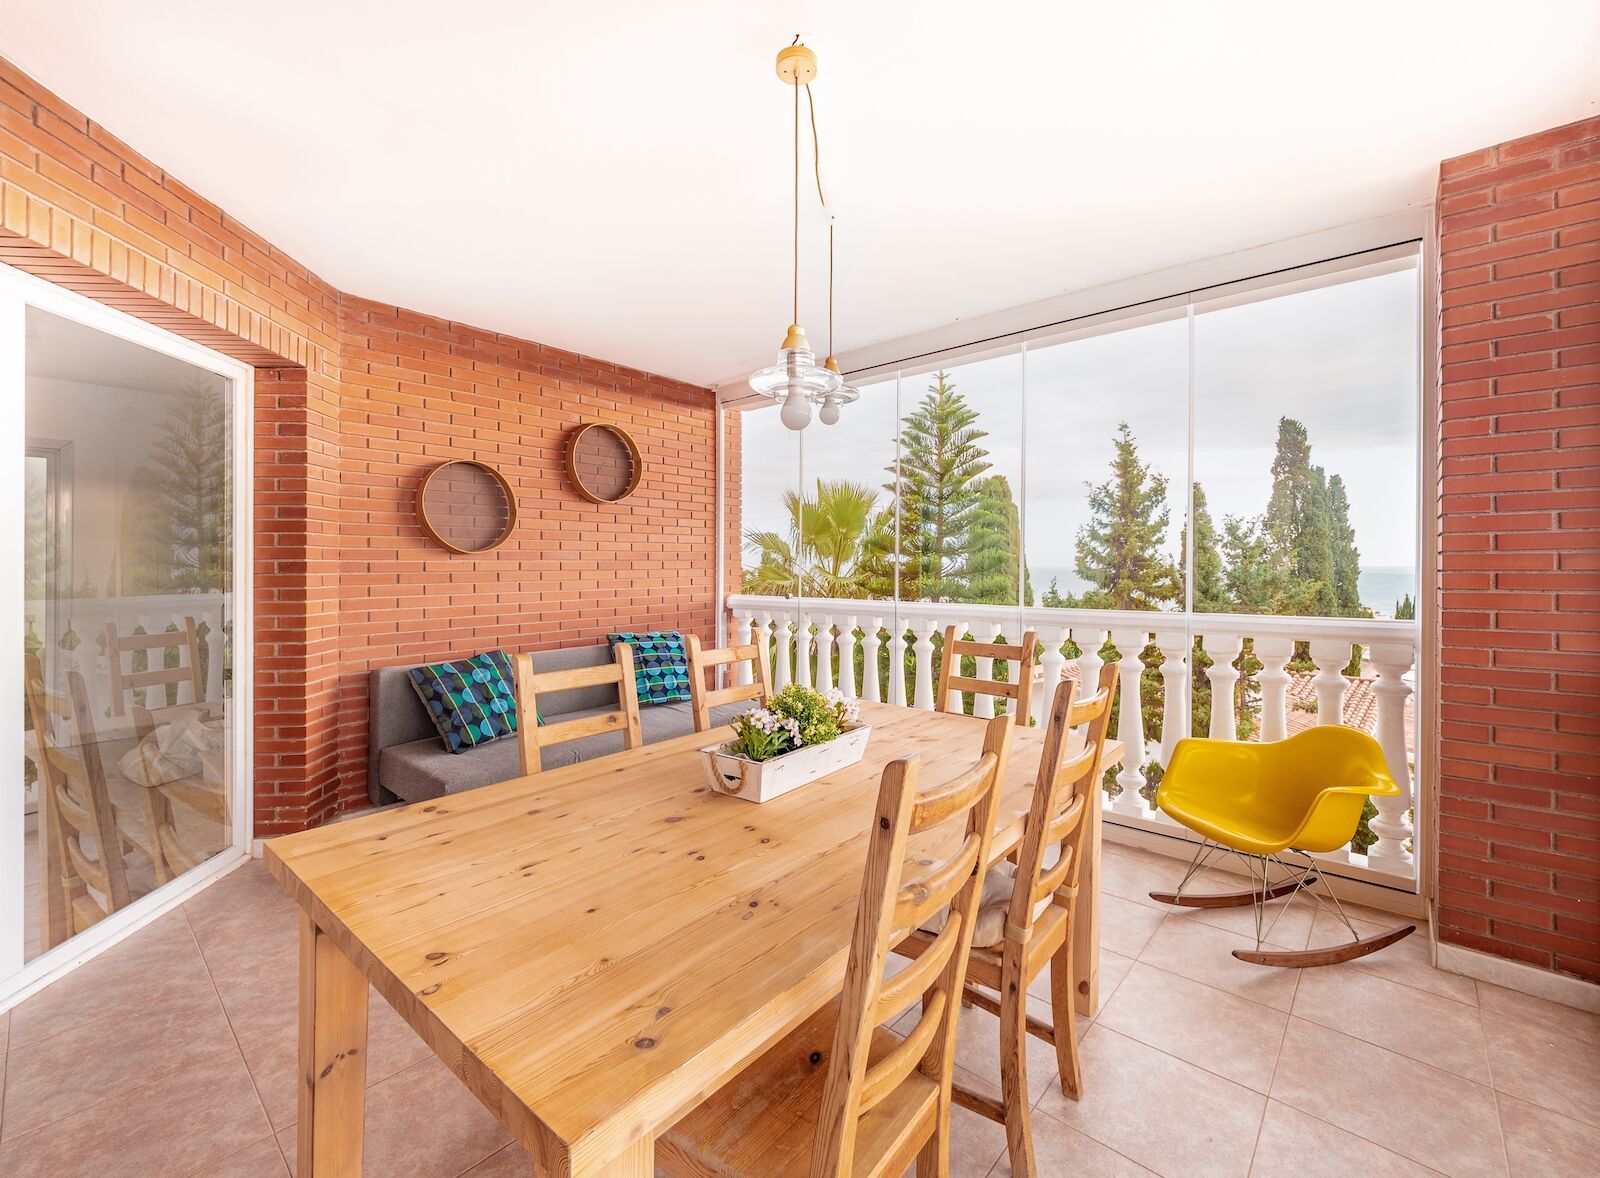 patio with table overlooking forest at airbnb rental home